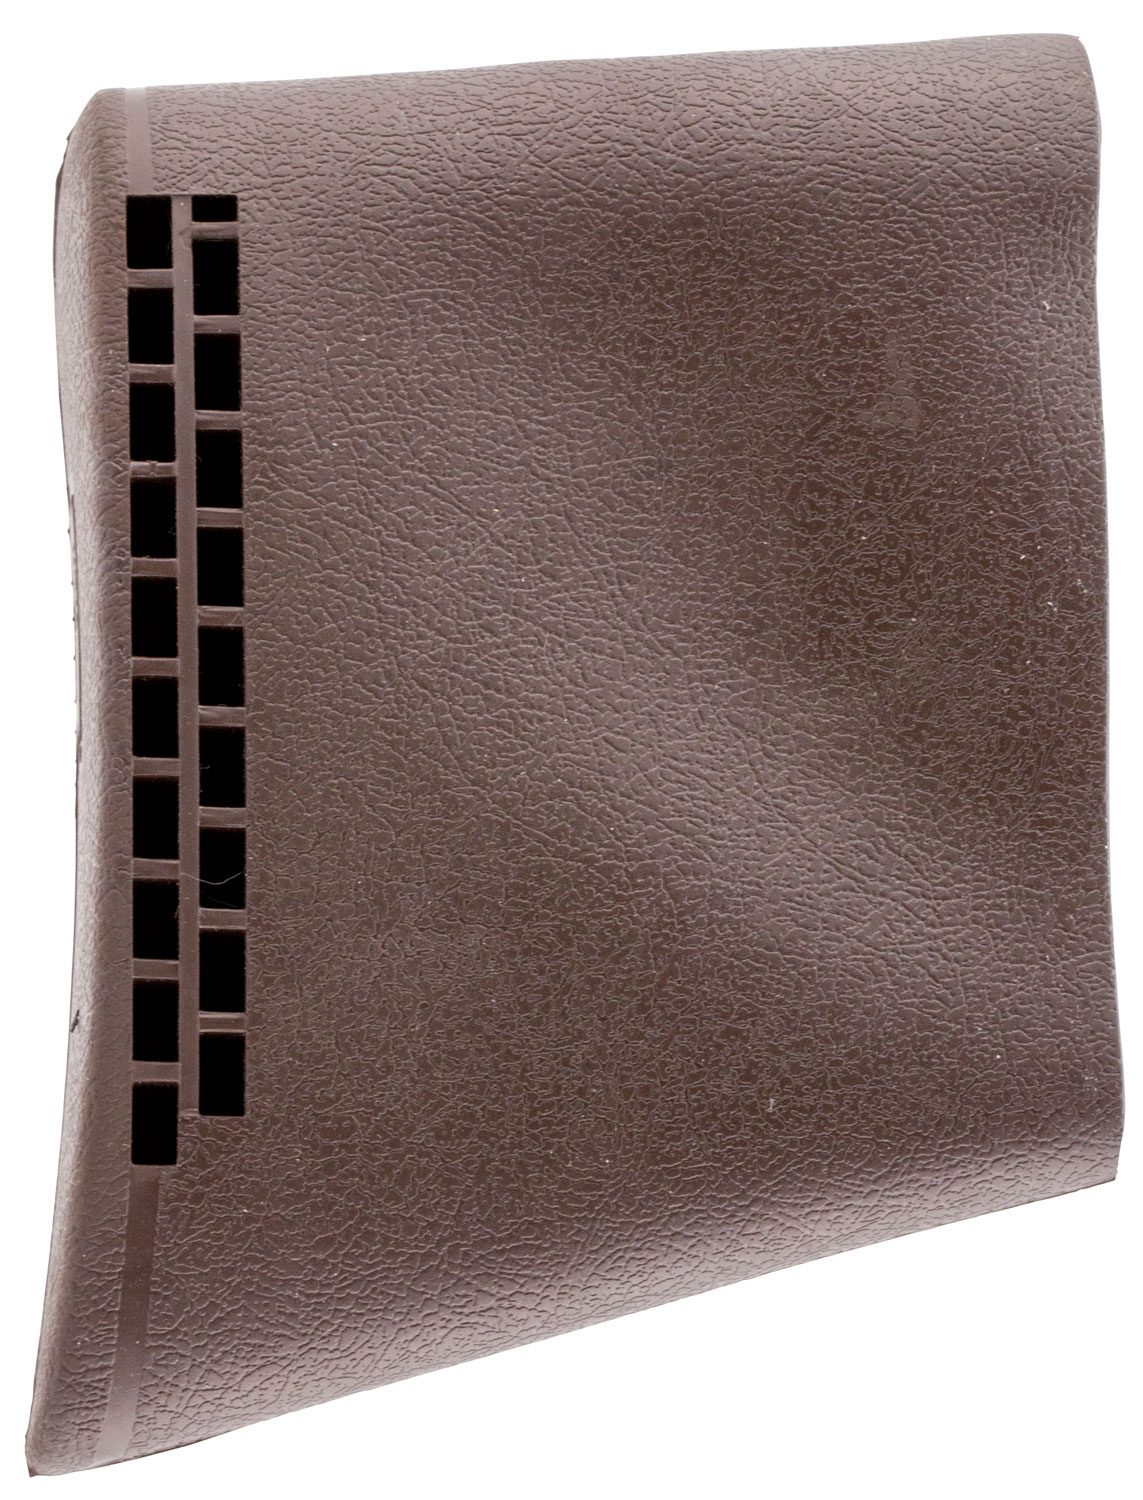 Butler Creek 50327 Slip-On Recoil Pad Large Brown Rubber